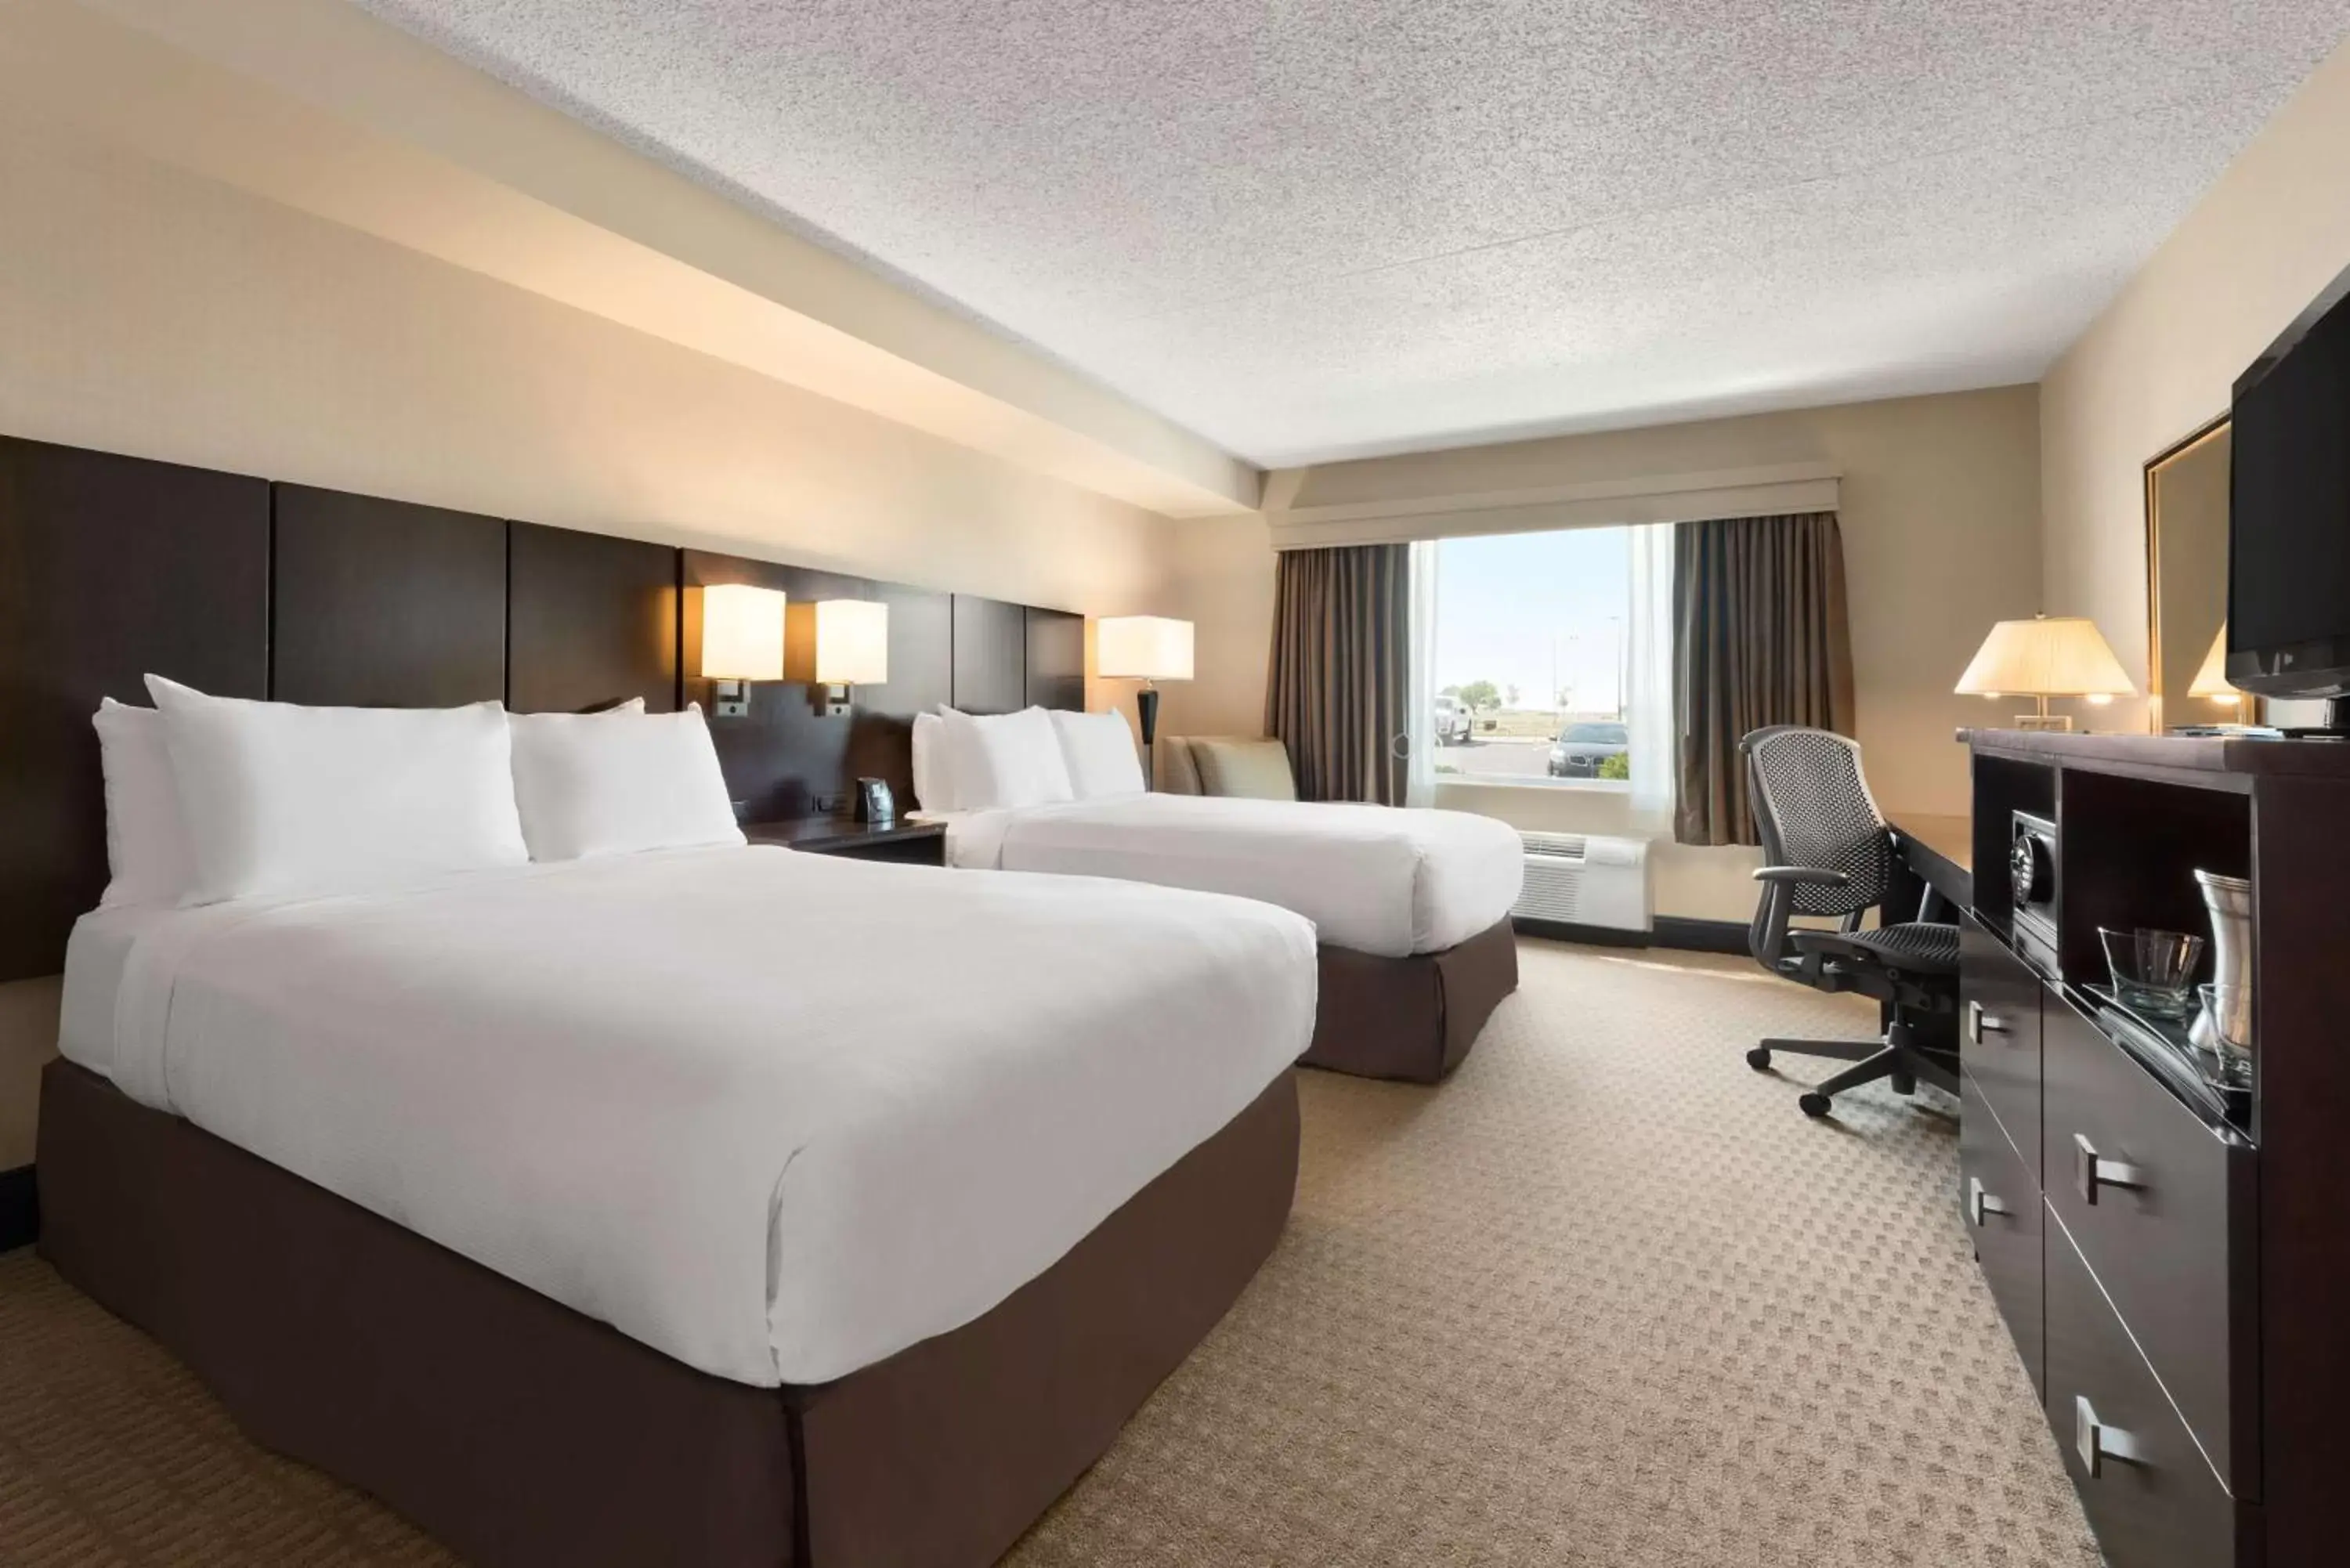 Bedroom in DoubleTree by Hilton Wichita Airport